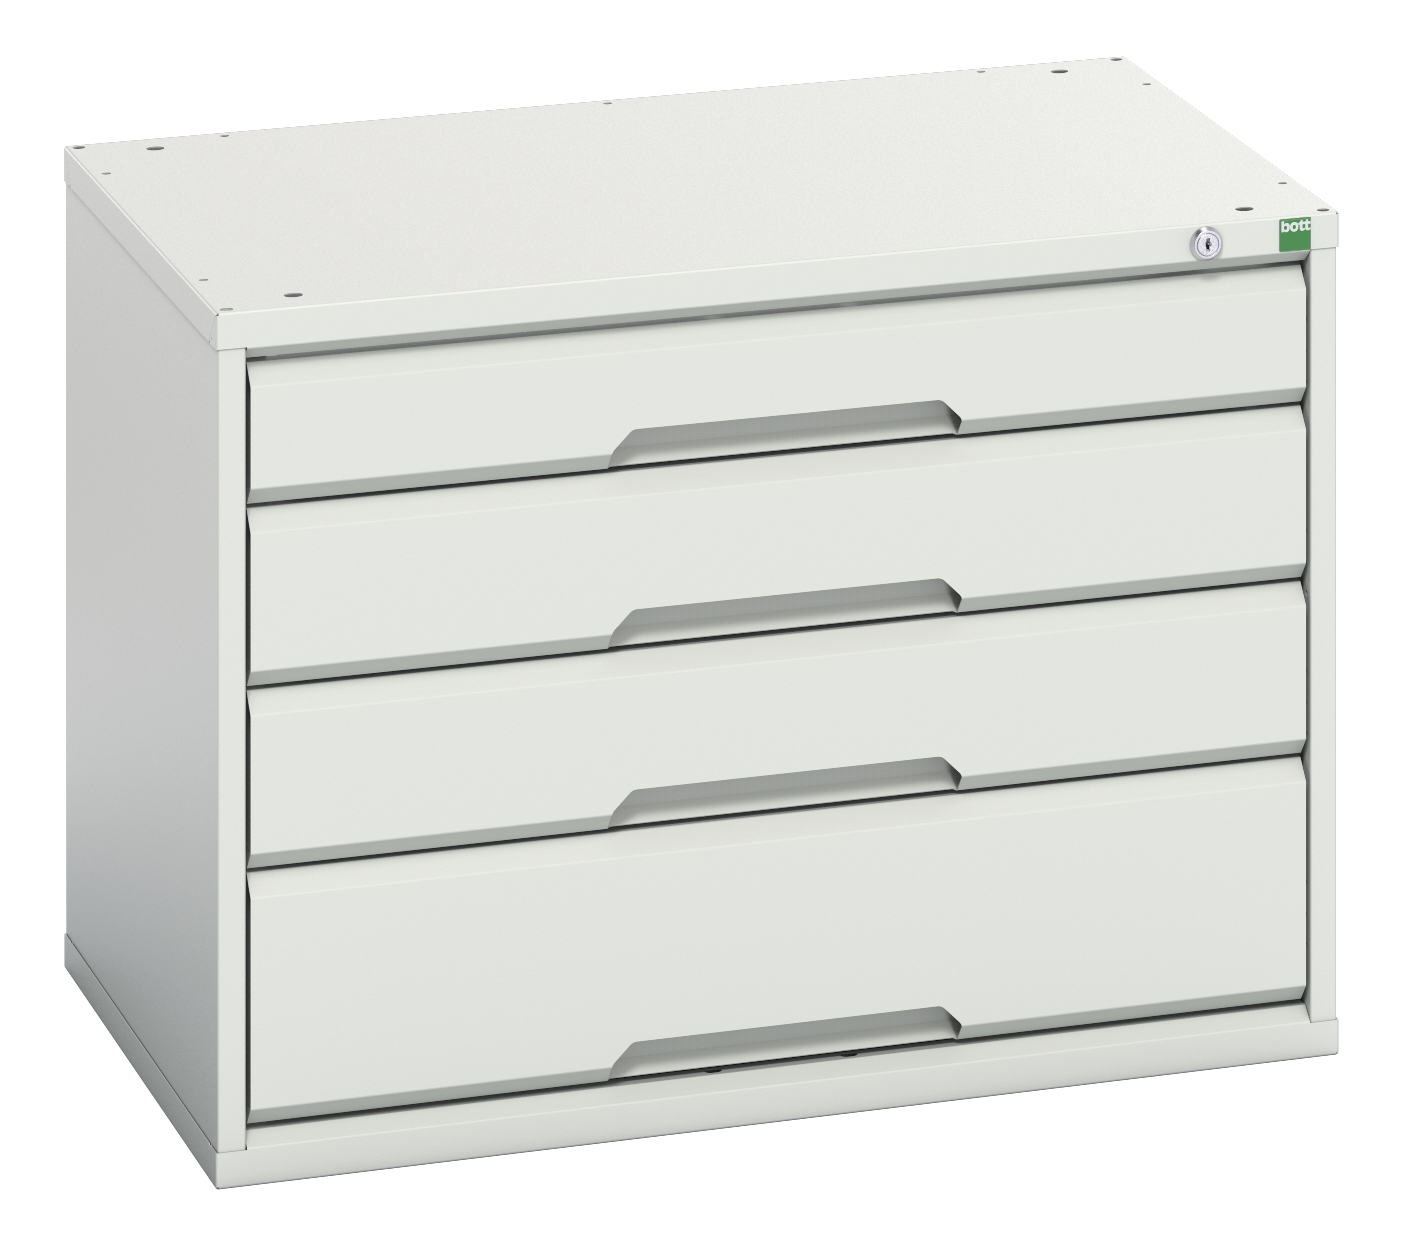 Bott Verso Drawer Cabinet With 4 Drawers - 16925104.16